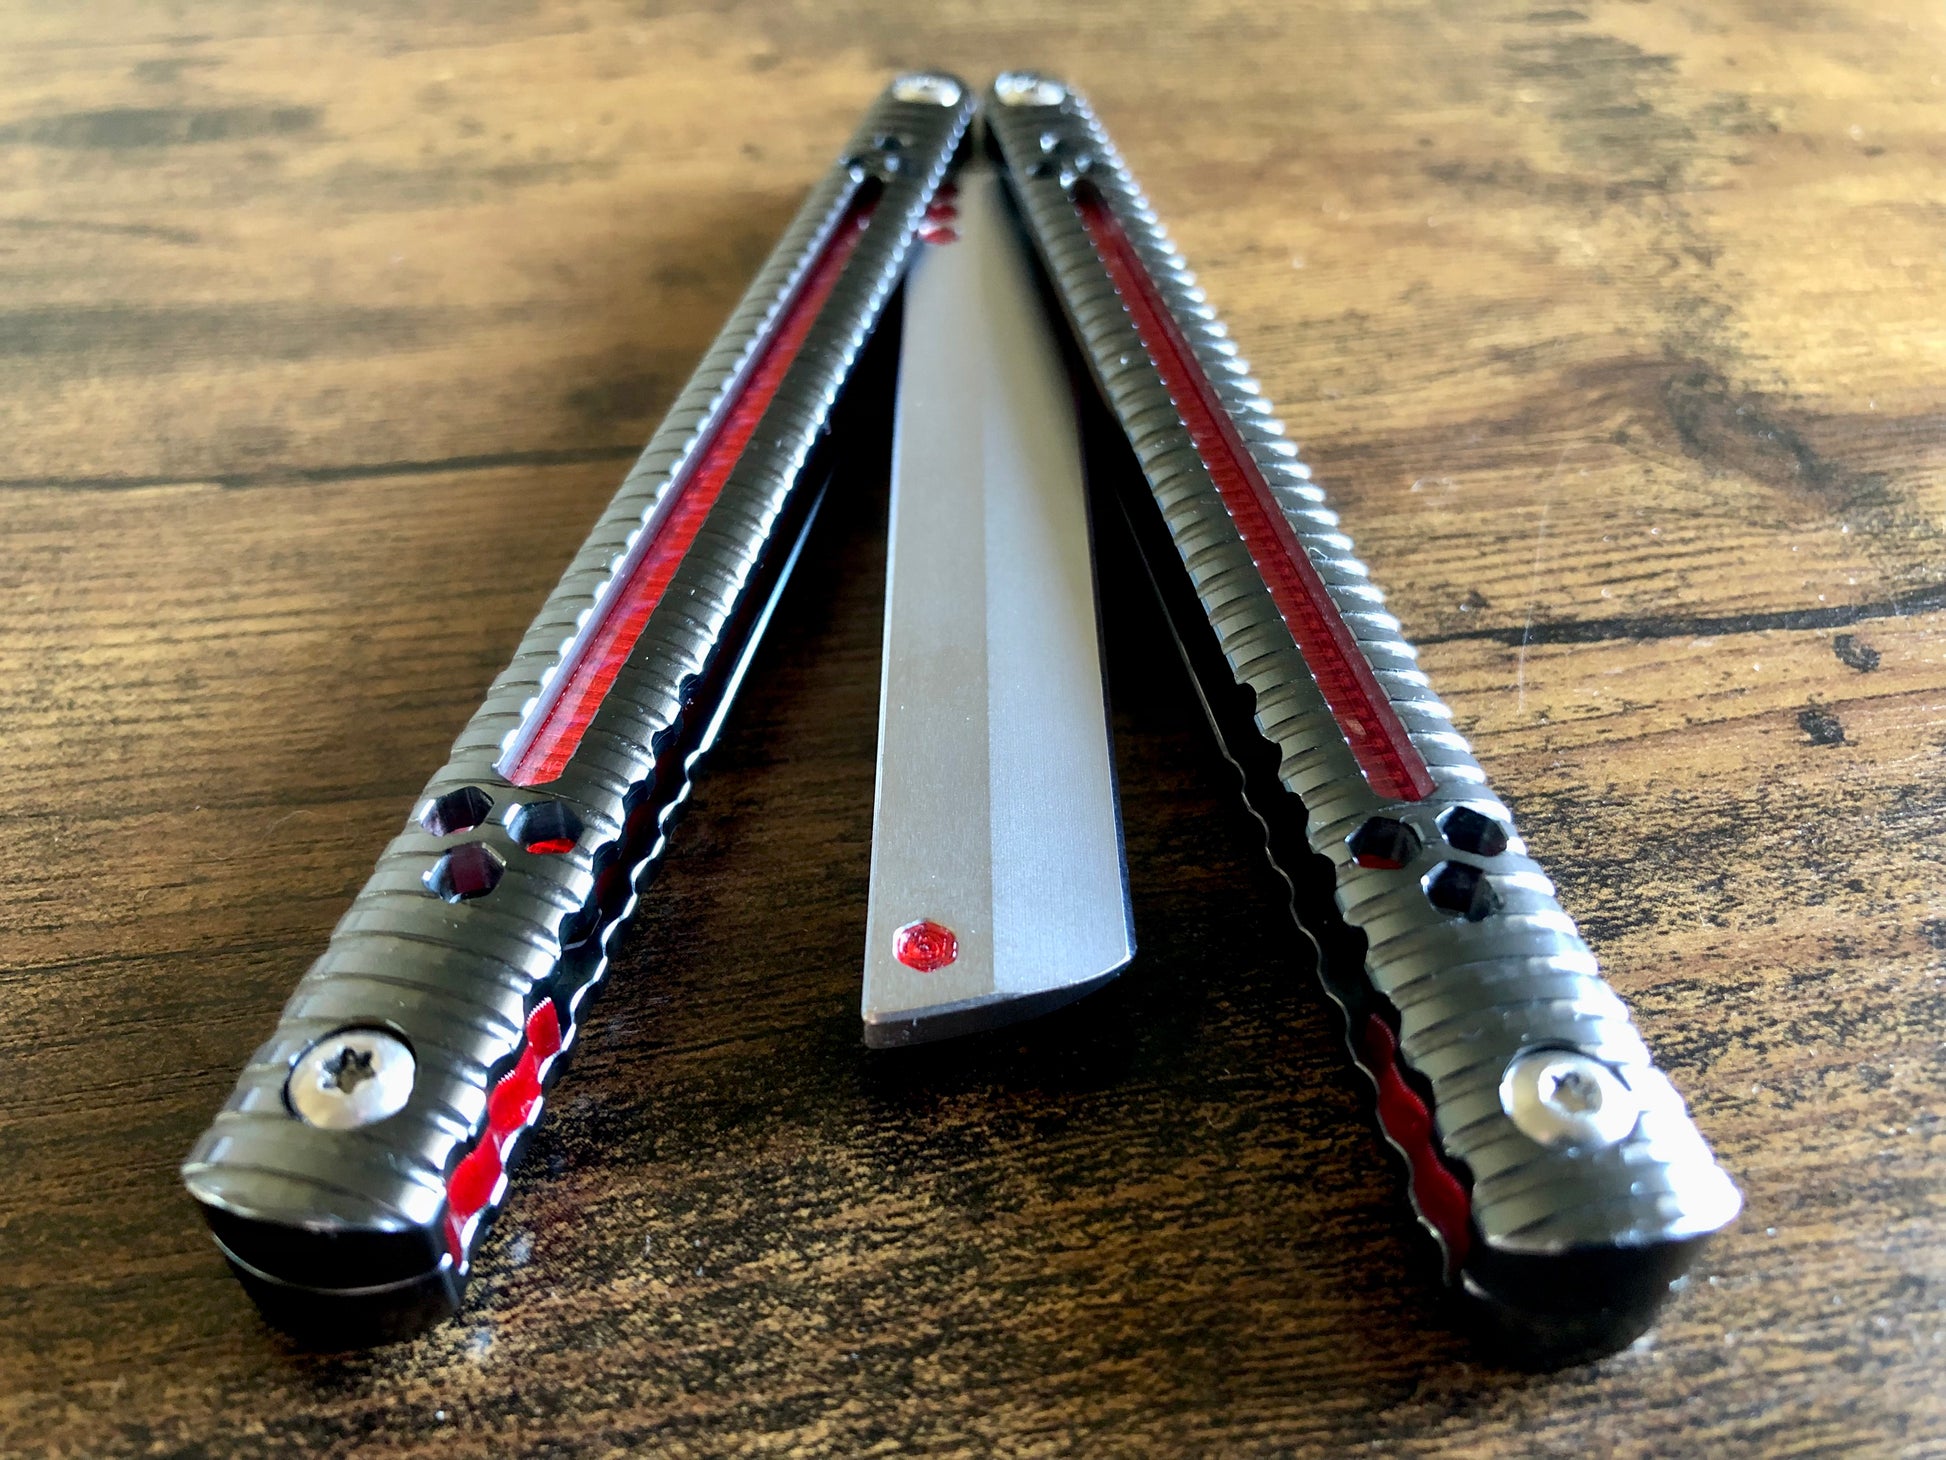 Adjust the balance of your B.A. Balis Nakiri balisong with these custom-made Zippy spacers.&nbsp;The Zippy spacers offer reduced handle bias compared to the stock spacers, and offer 3x intermediate balance configurations so you can fine-tune the balance to your preference. Cosmetic blade inserts are included, and optional handle inlays add a pop of color.&nbsp;